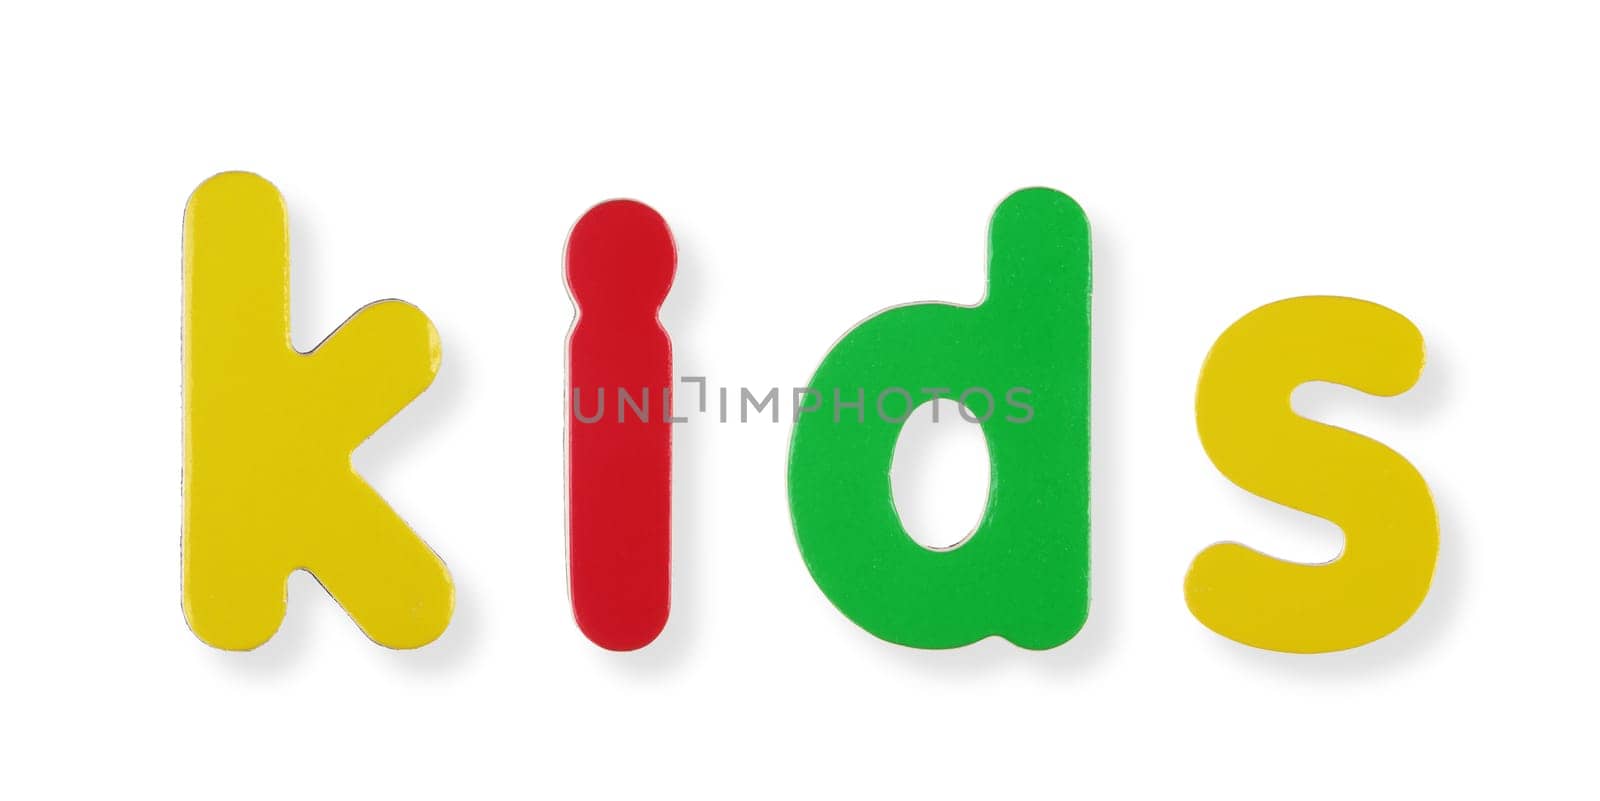 A kids word in coloured magnetic letters on white with clipping path to remove shadow